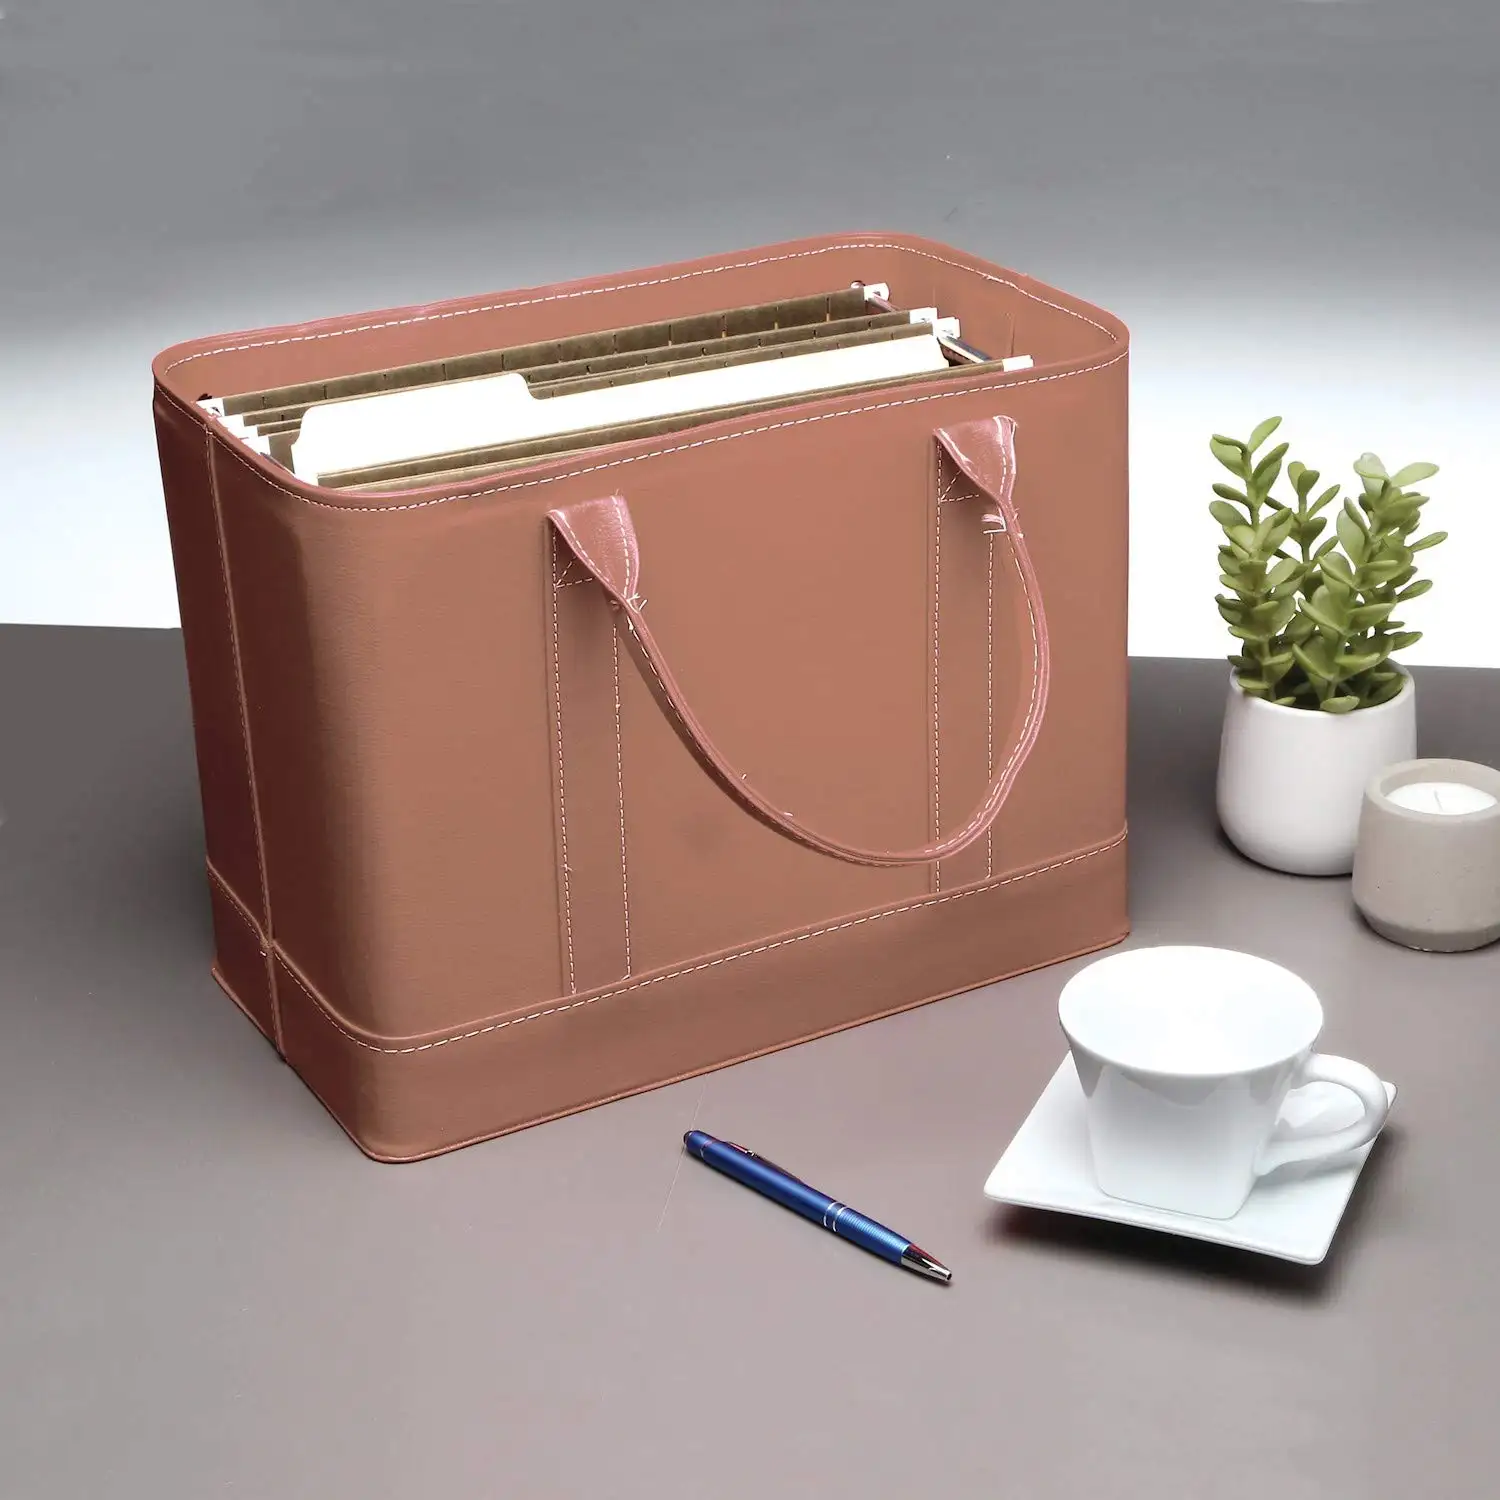 Portable File Box Chic File Organizer Tote Important Document Organizer Bag with Handle